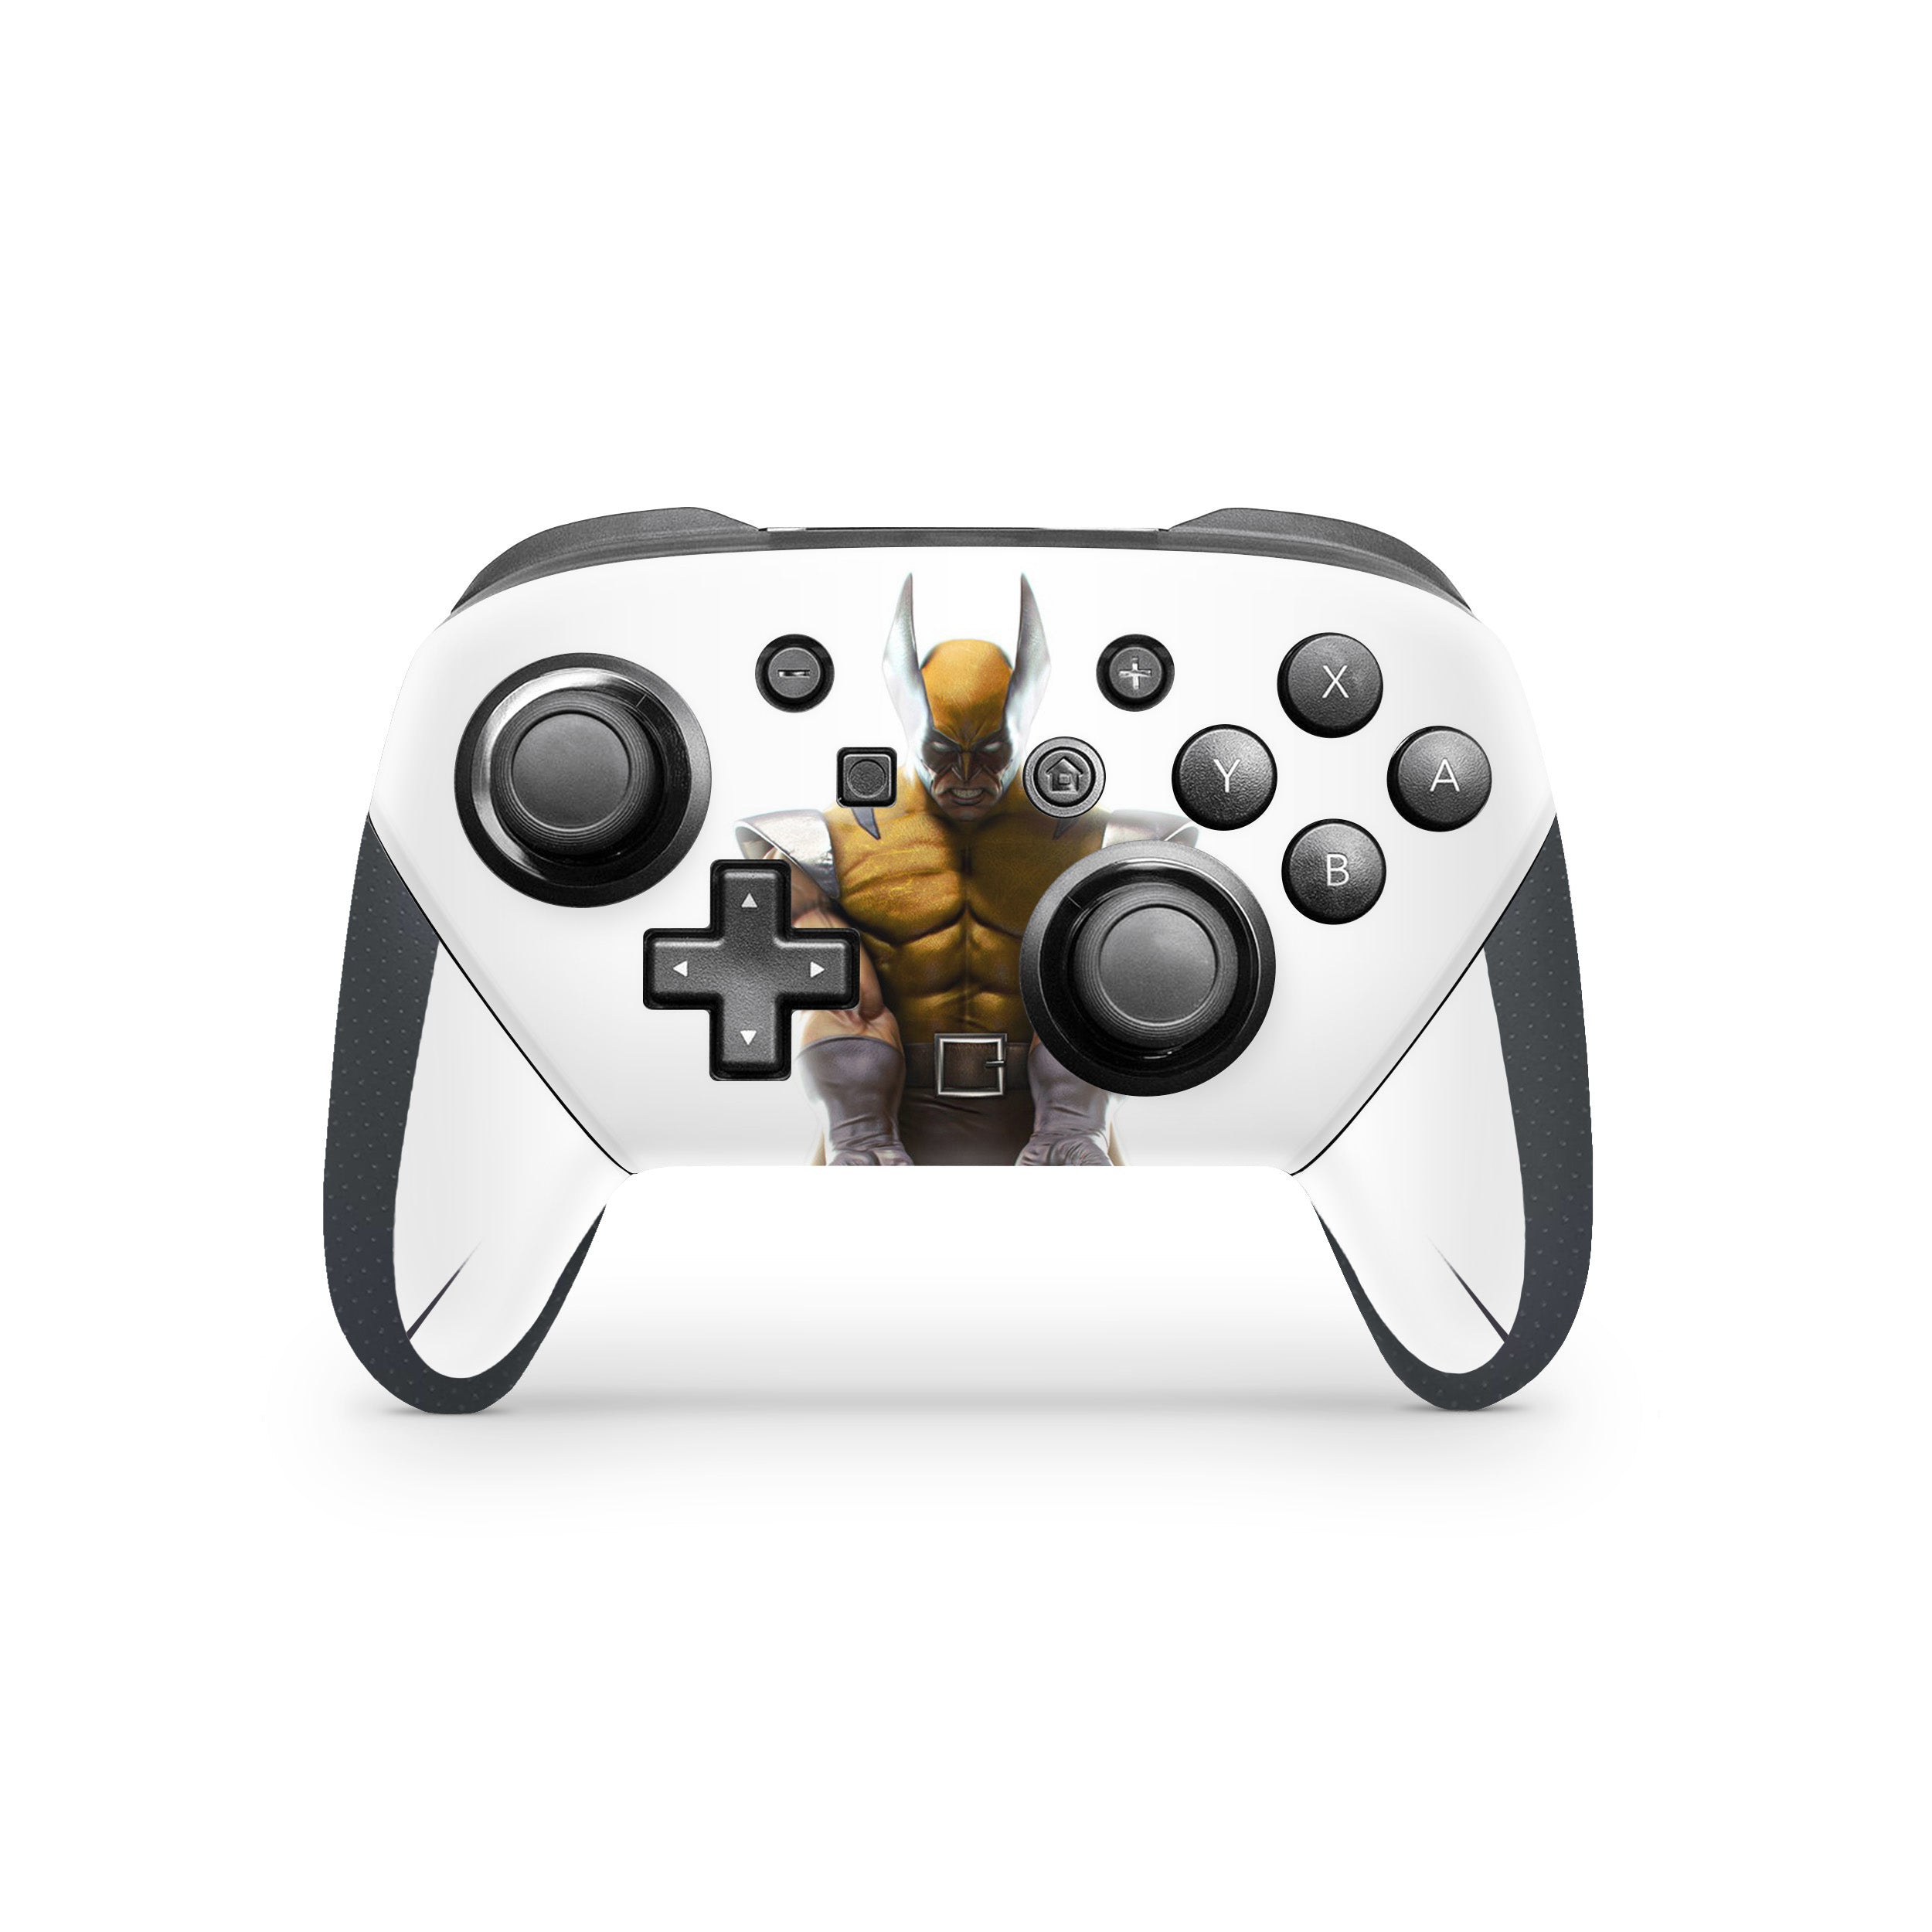 A video game skin featuring a Marvel Comics X Men Magneto design for the Switch Pro Controller.